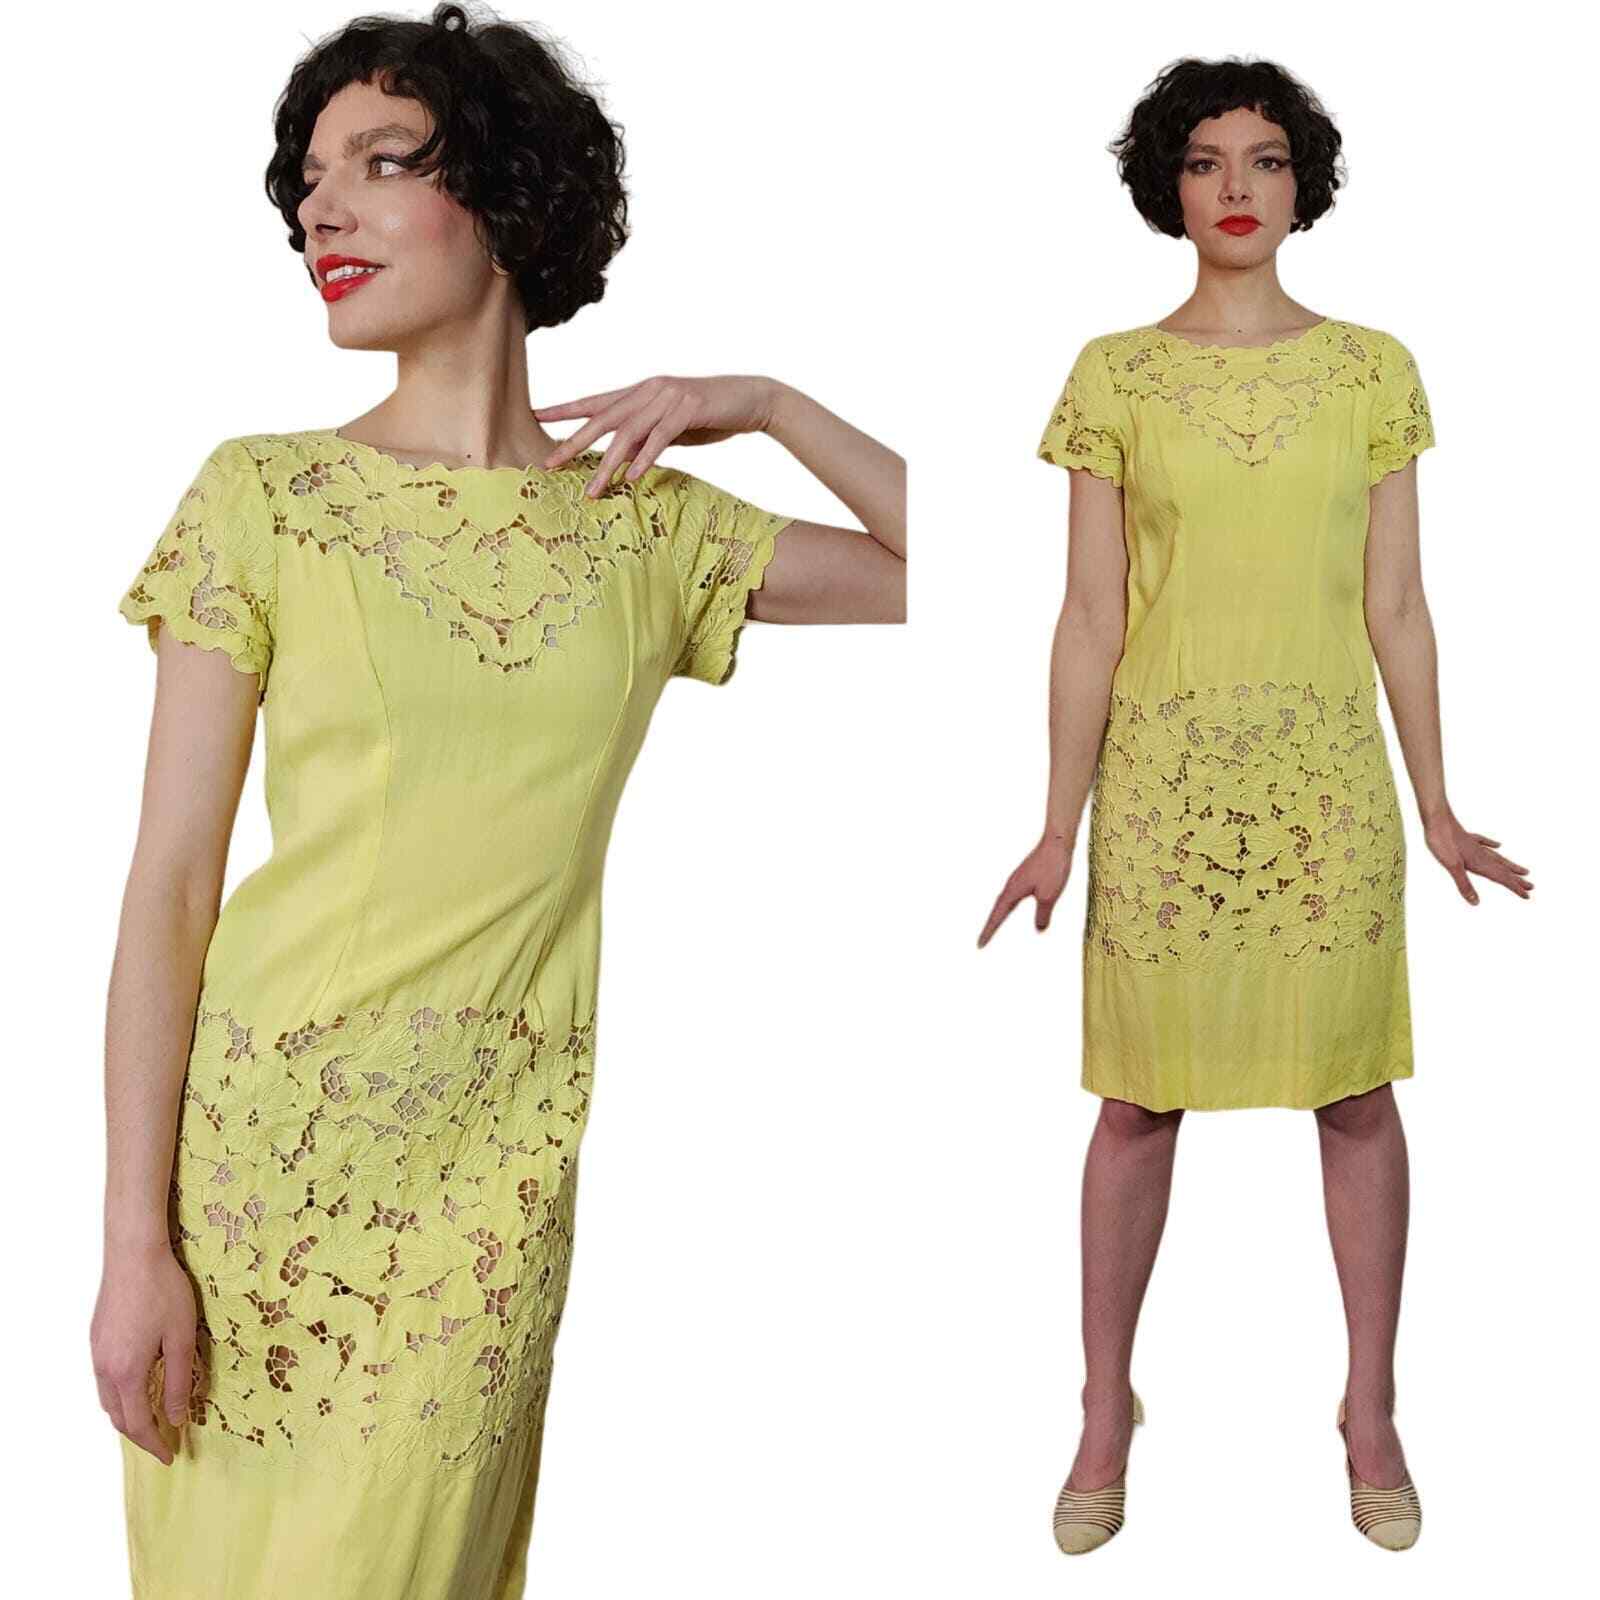 Vintage 60s Yellow Summer Dress Cut Lace 20s Style - image 1